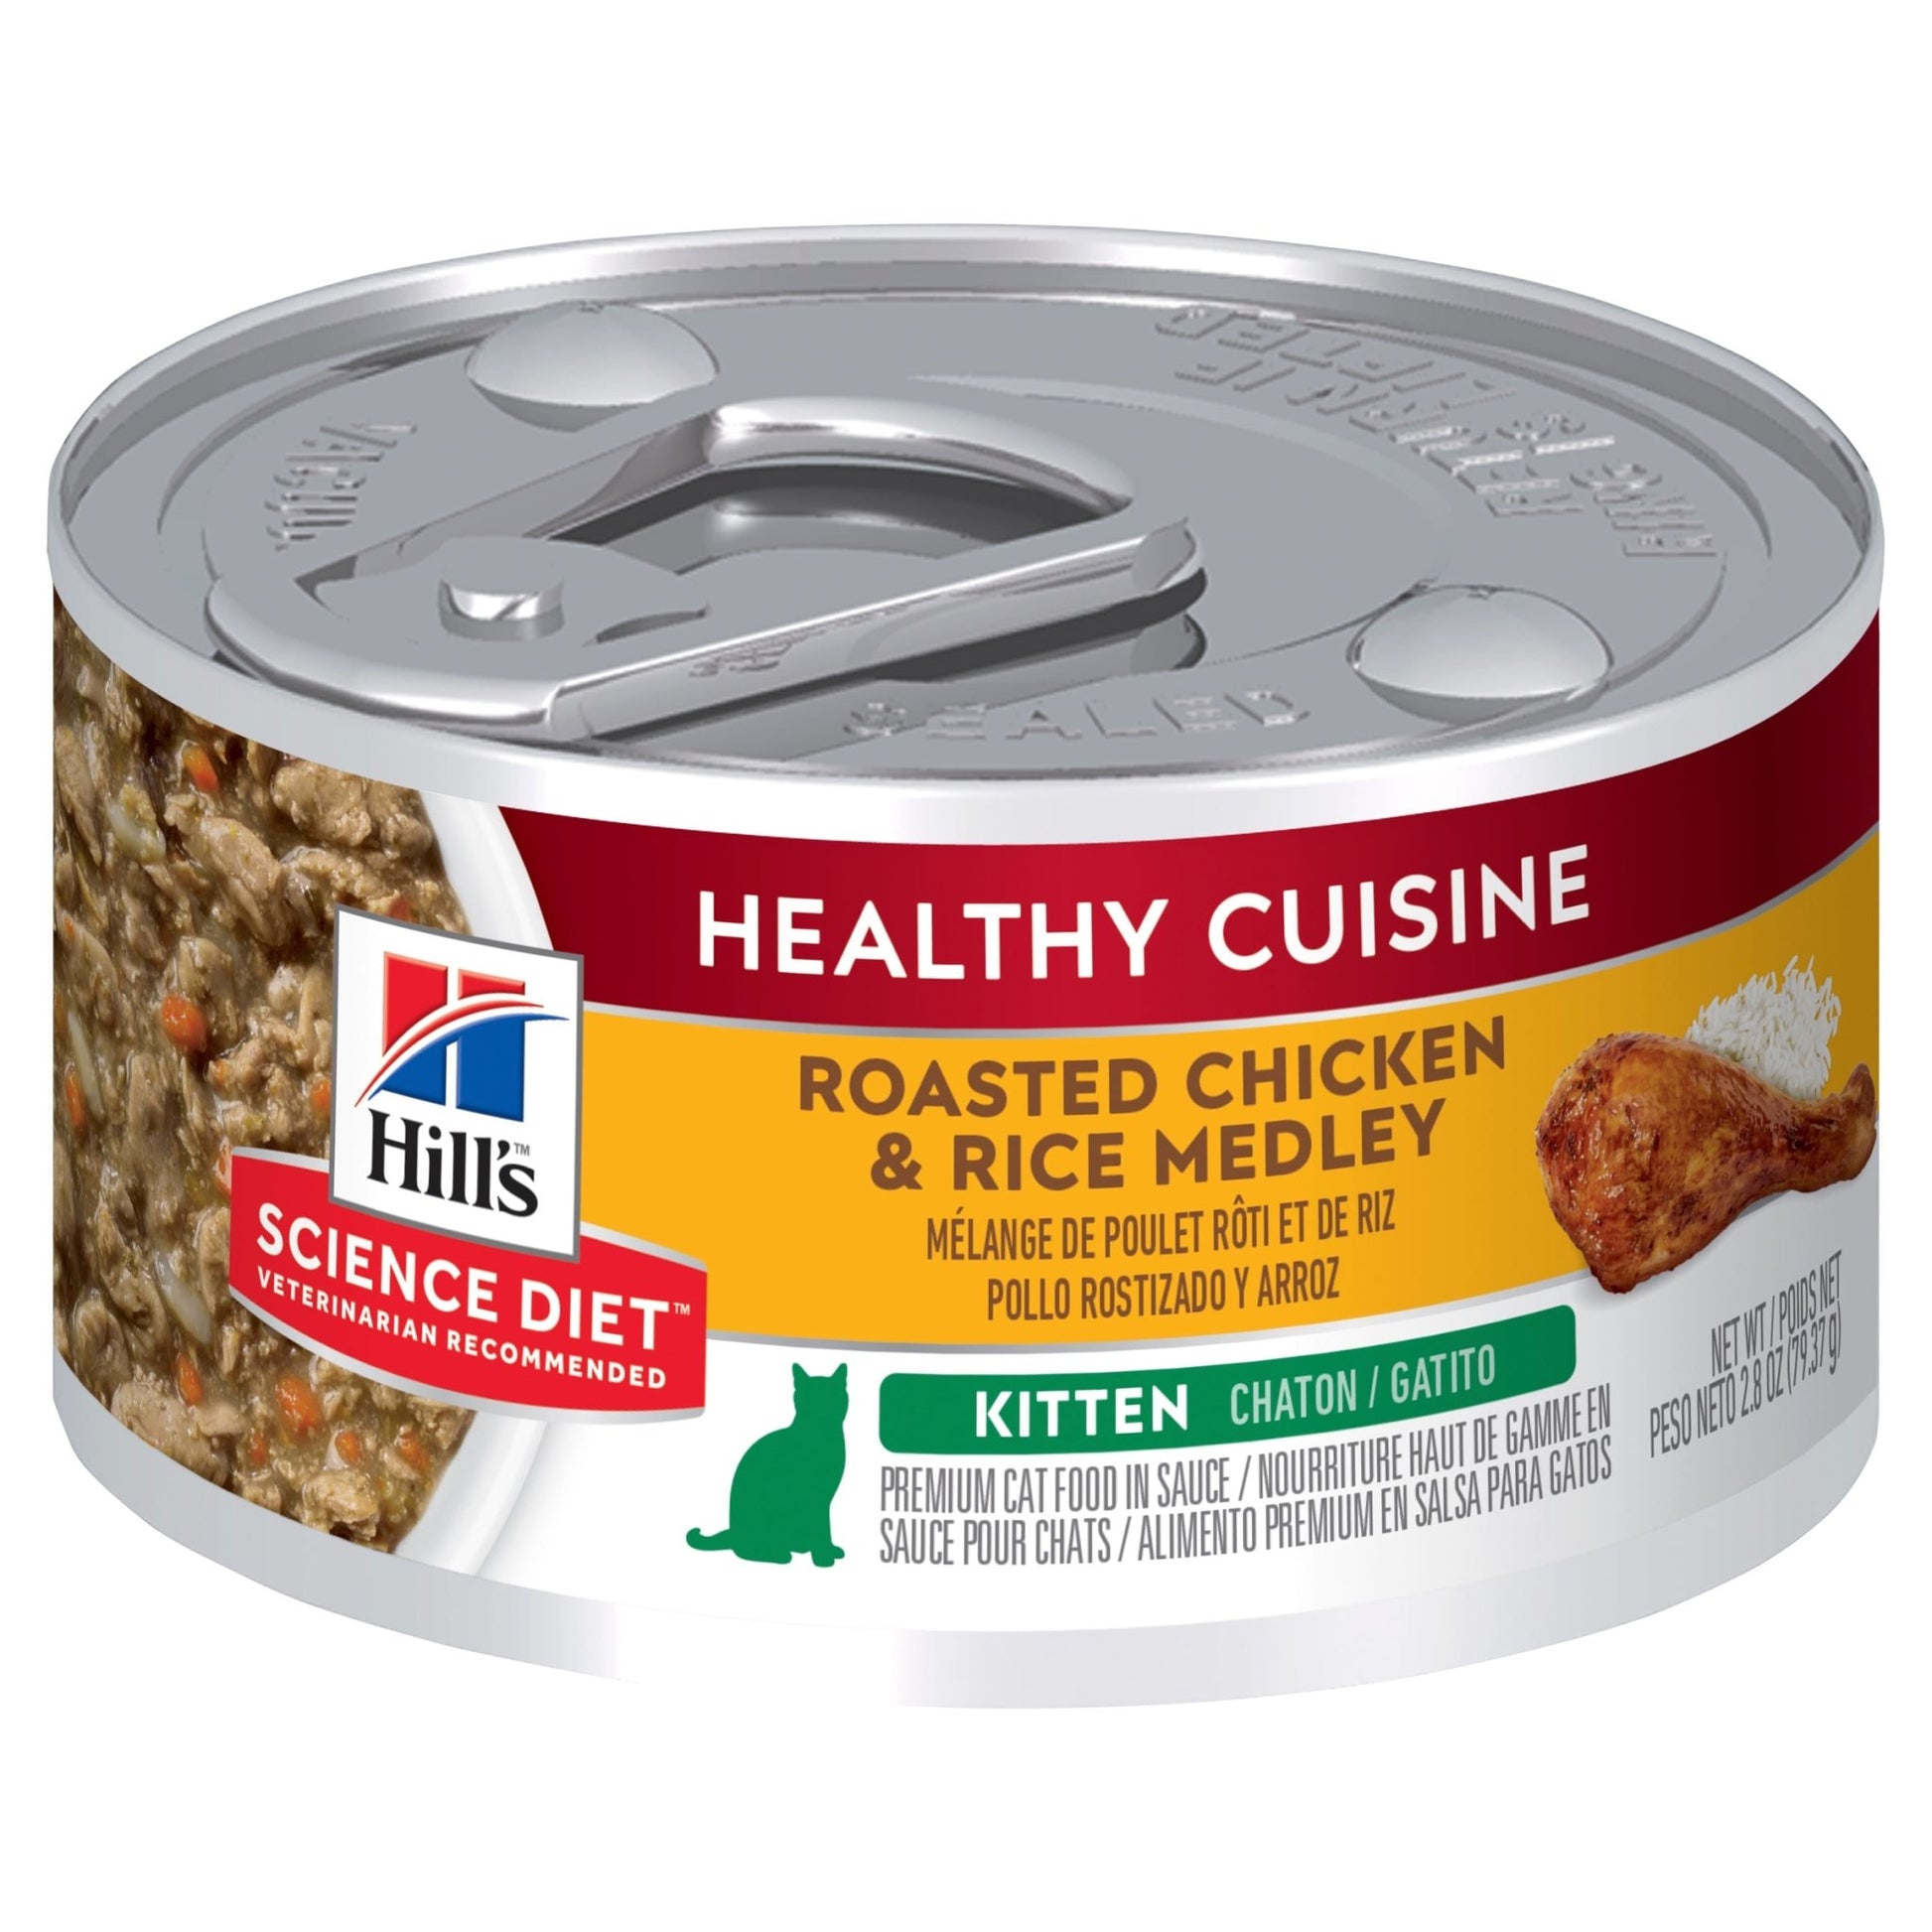 Hill's Science Diet Kitten Healthy Cuisine Chicken & Rice Medley Canned Cat Food 24x79g - Woonona Petfood & Produce